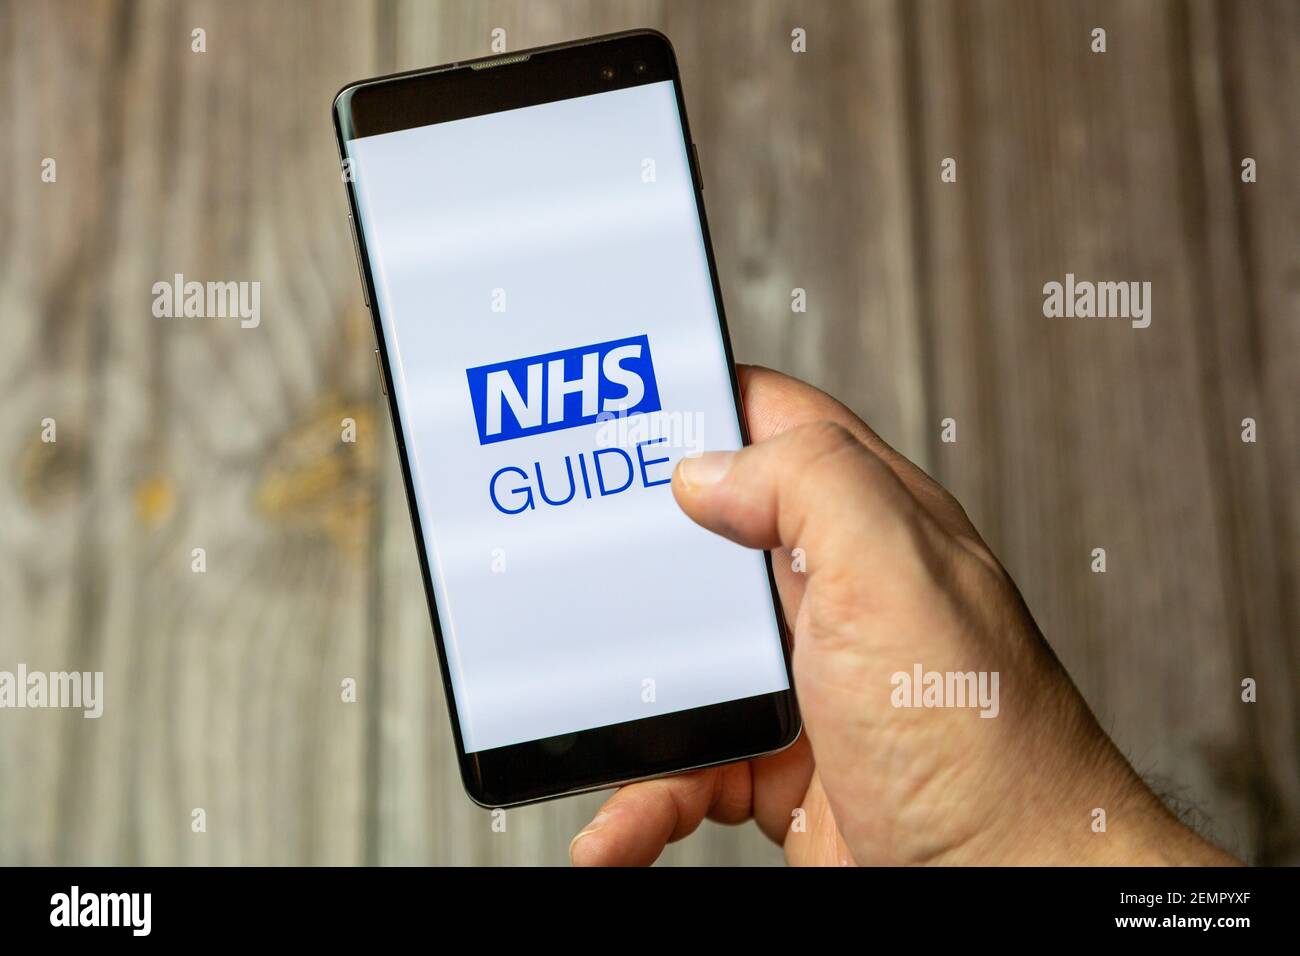 A mobile phone or cell phone being held by a hand with the NHS Guide app open on screen Stock Photo